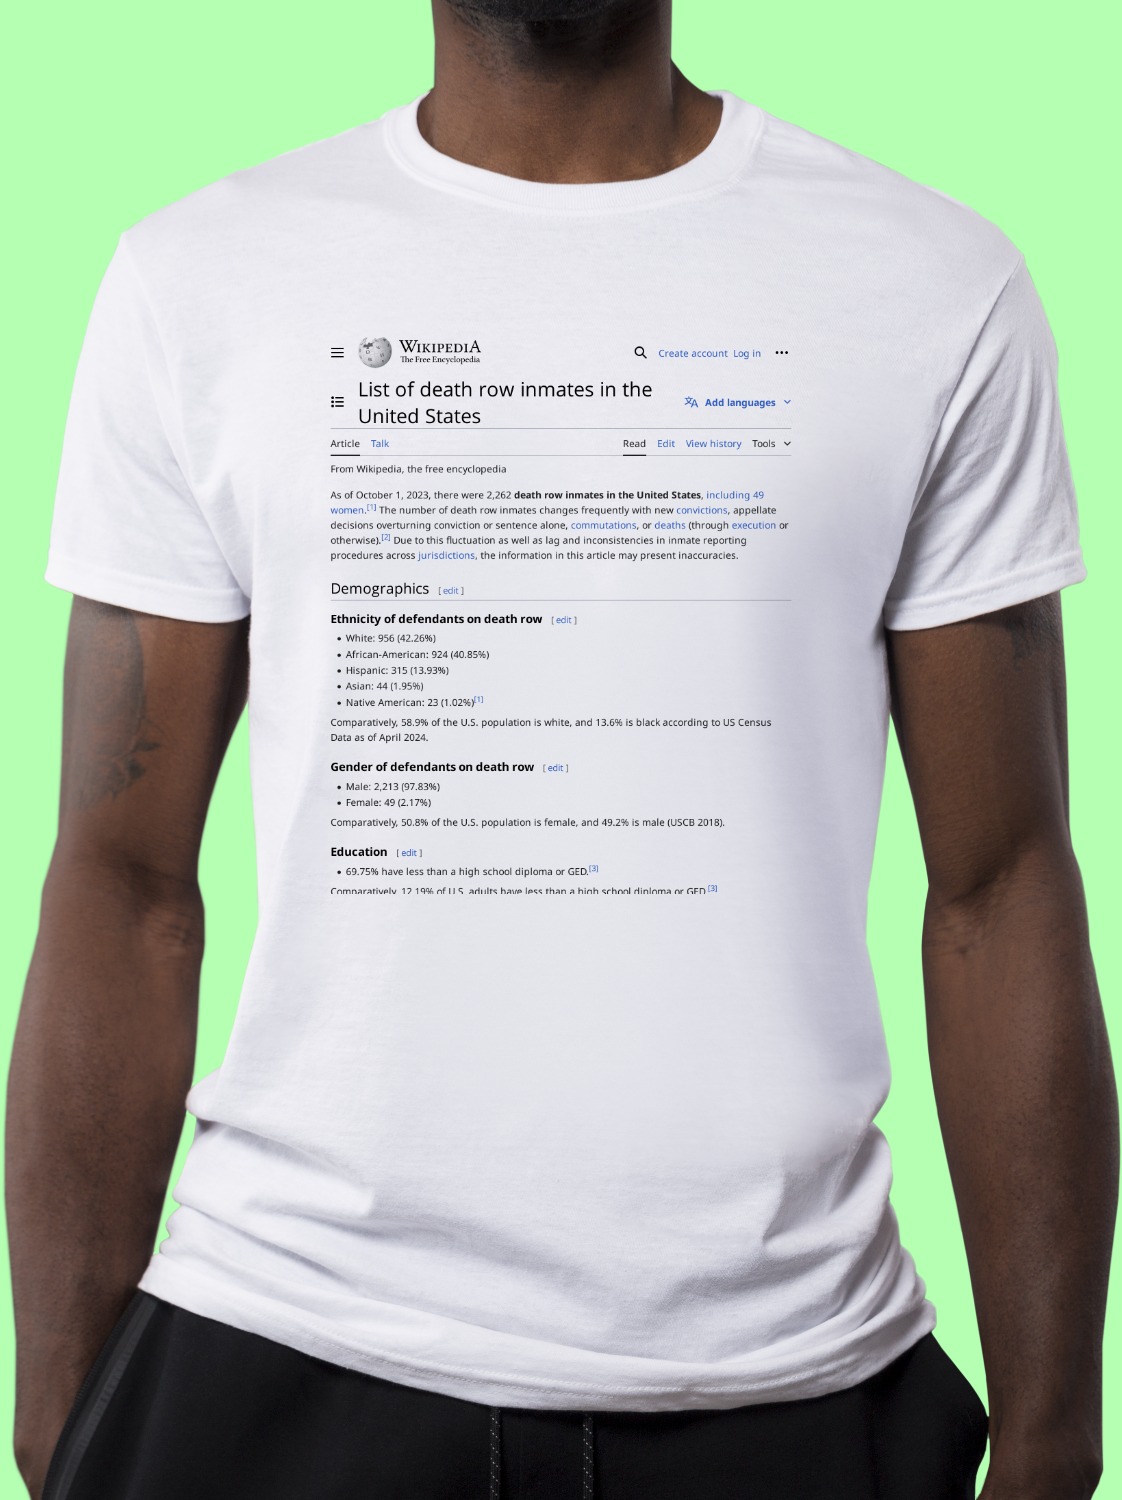 List_of_death_row_inmates_in_the_United_States Wikipedia Shirt